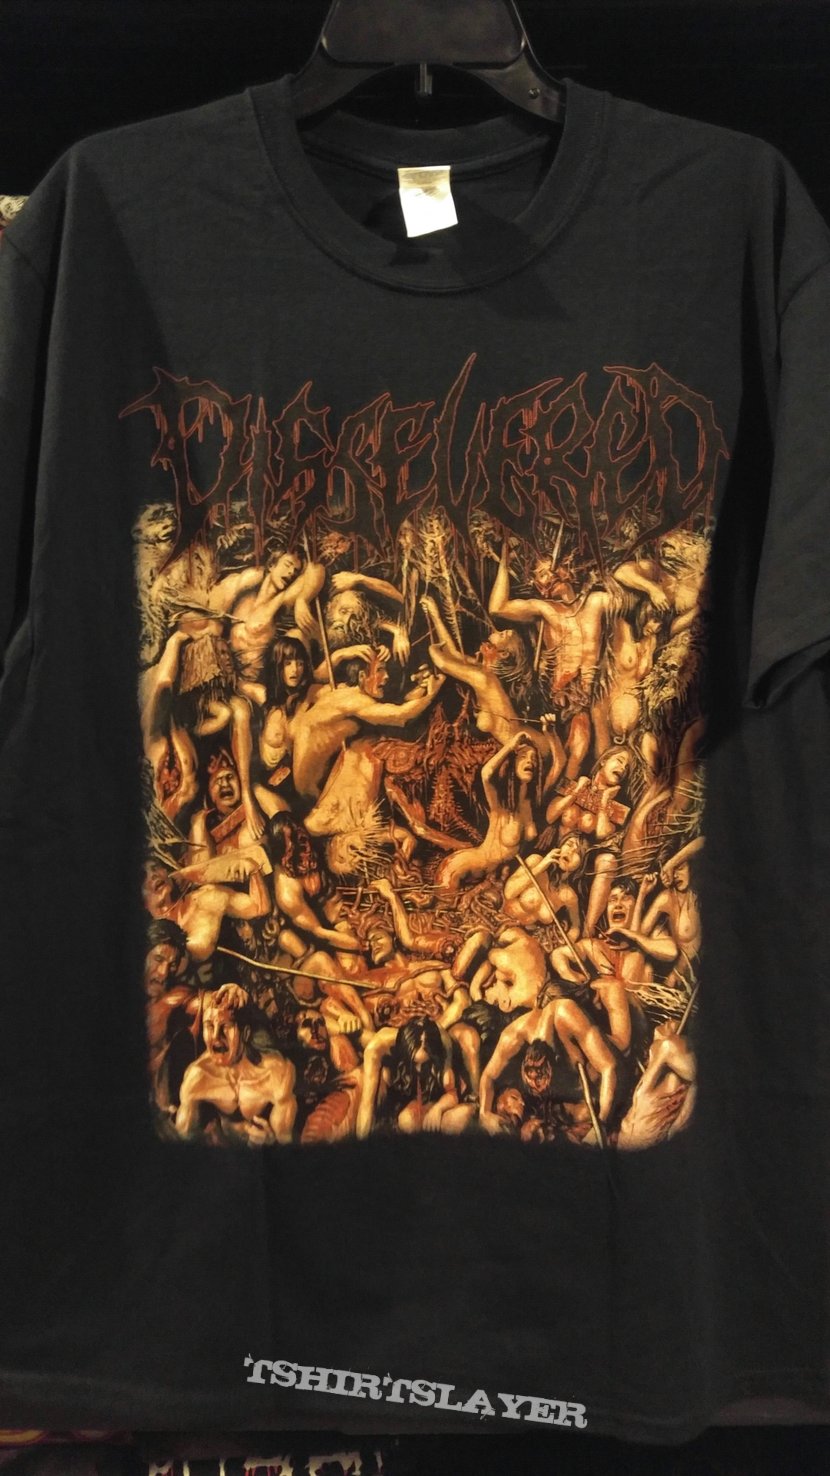 Dissevered t-shirt